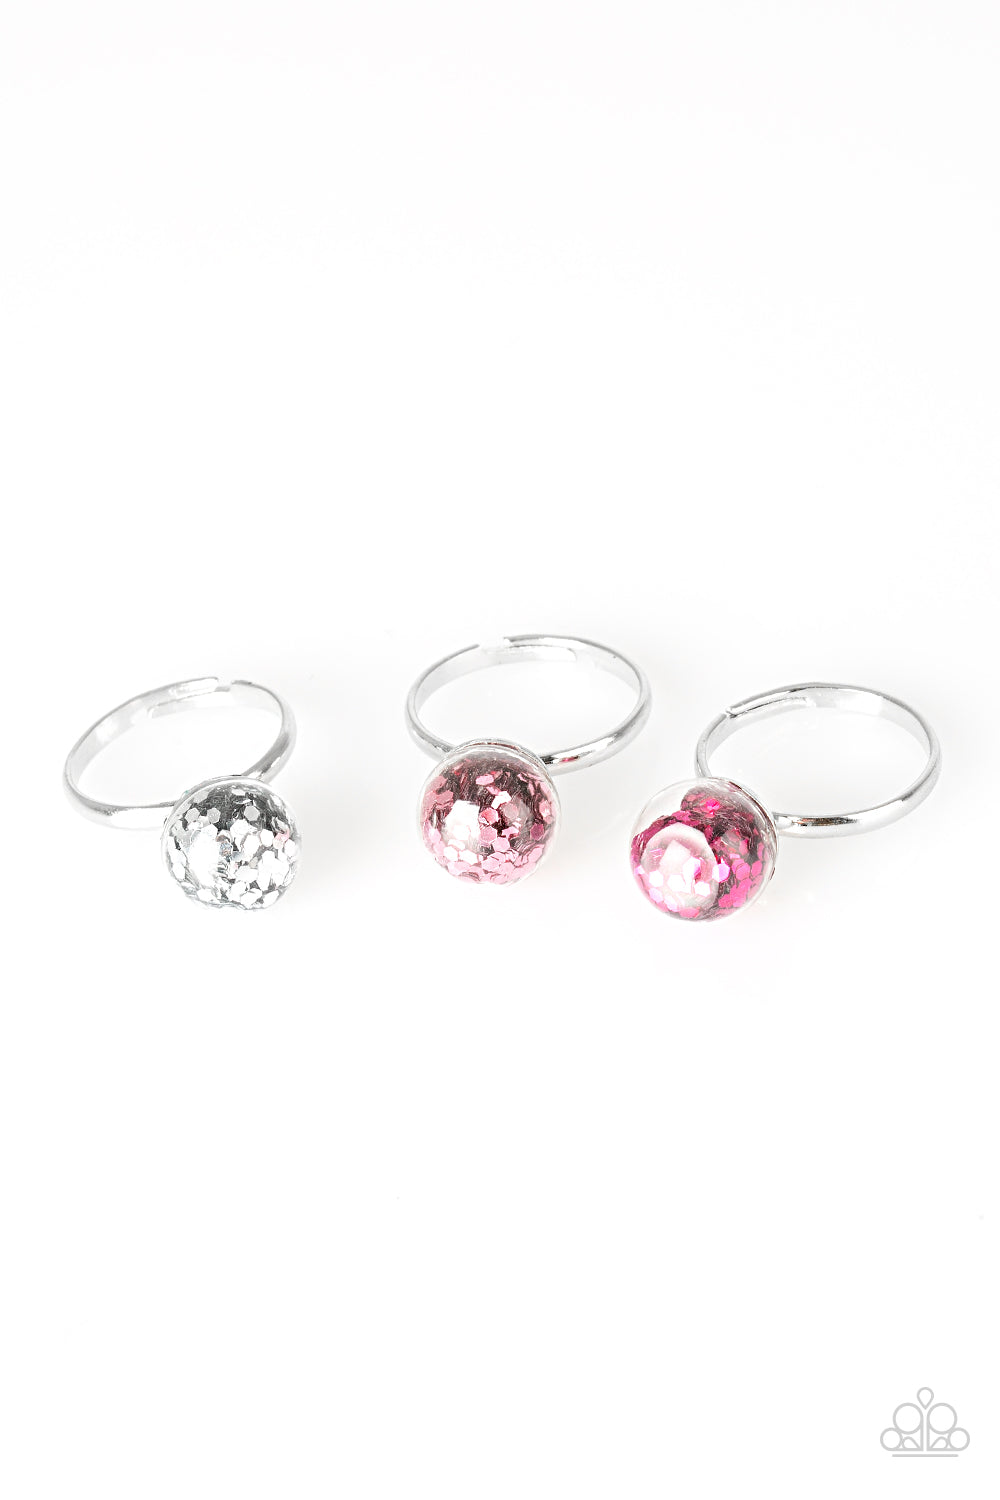 Paparazzi Starlet Shimmer Rings - 10 - Confetti - Gold, Silver, Light and Dark Pink - $5 Jewelry With Ashley Swint